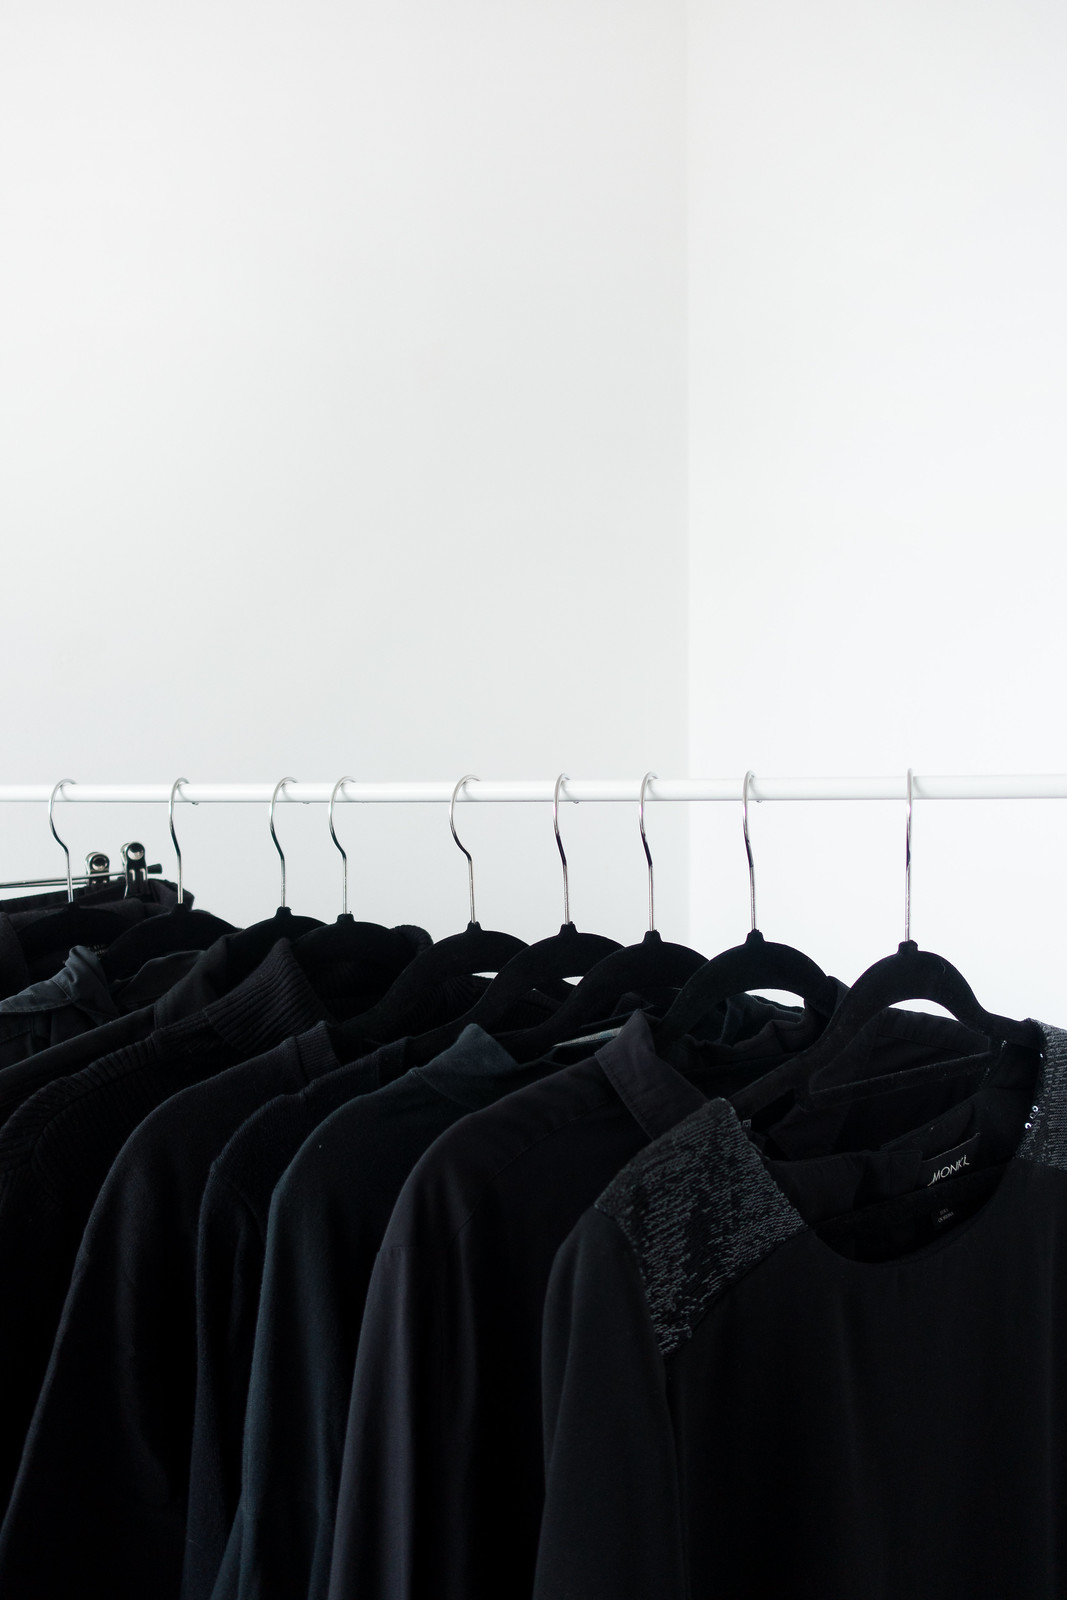 Making A Capsule Wardrobe (Using What You Already Own)